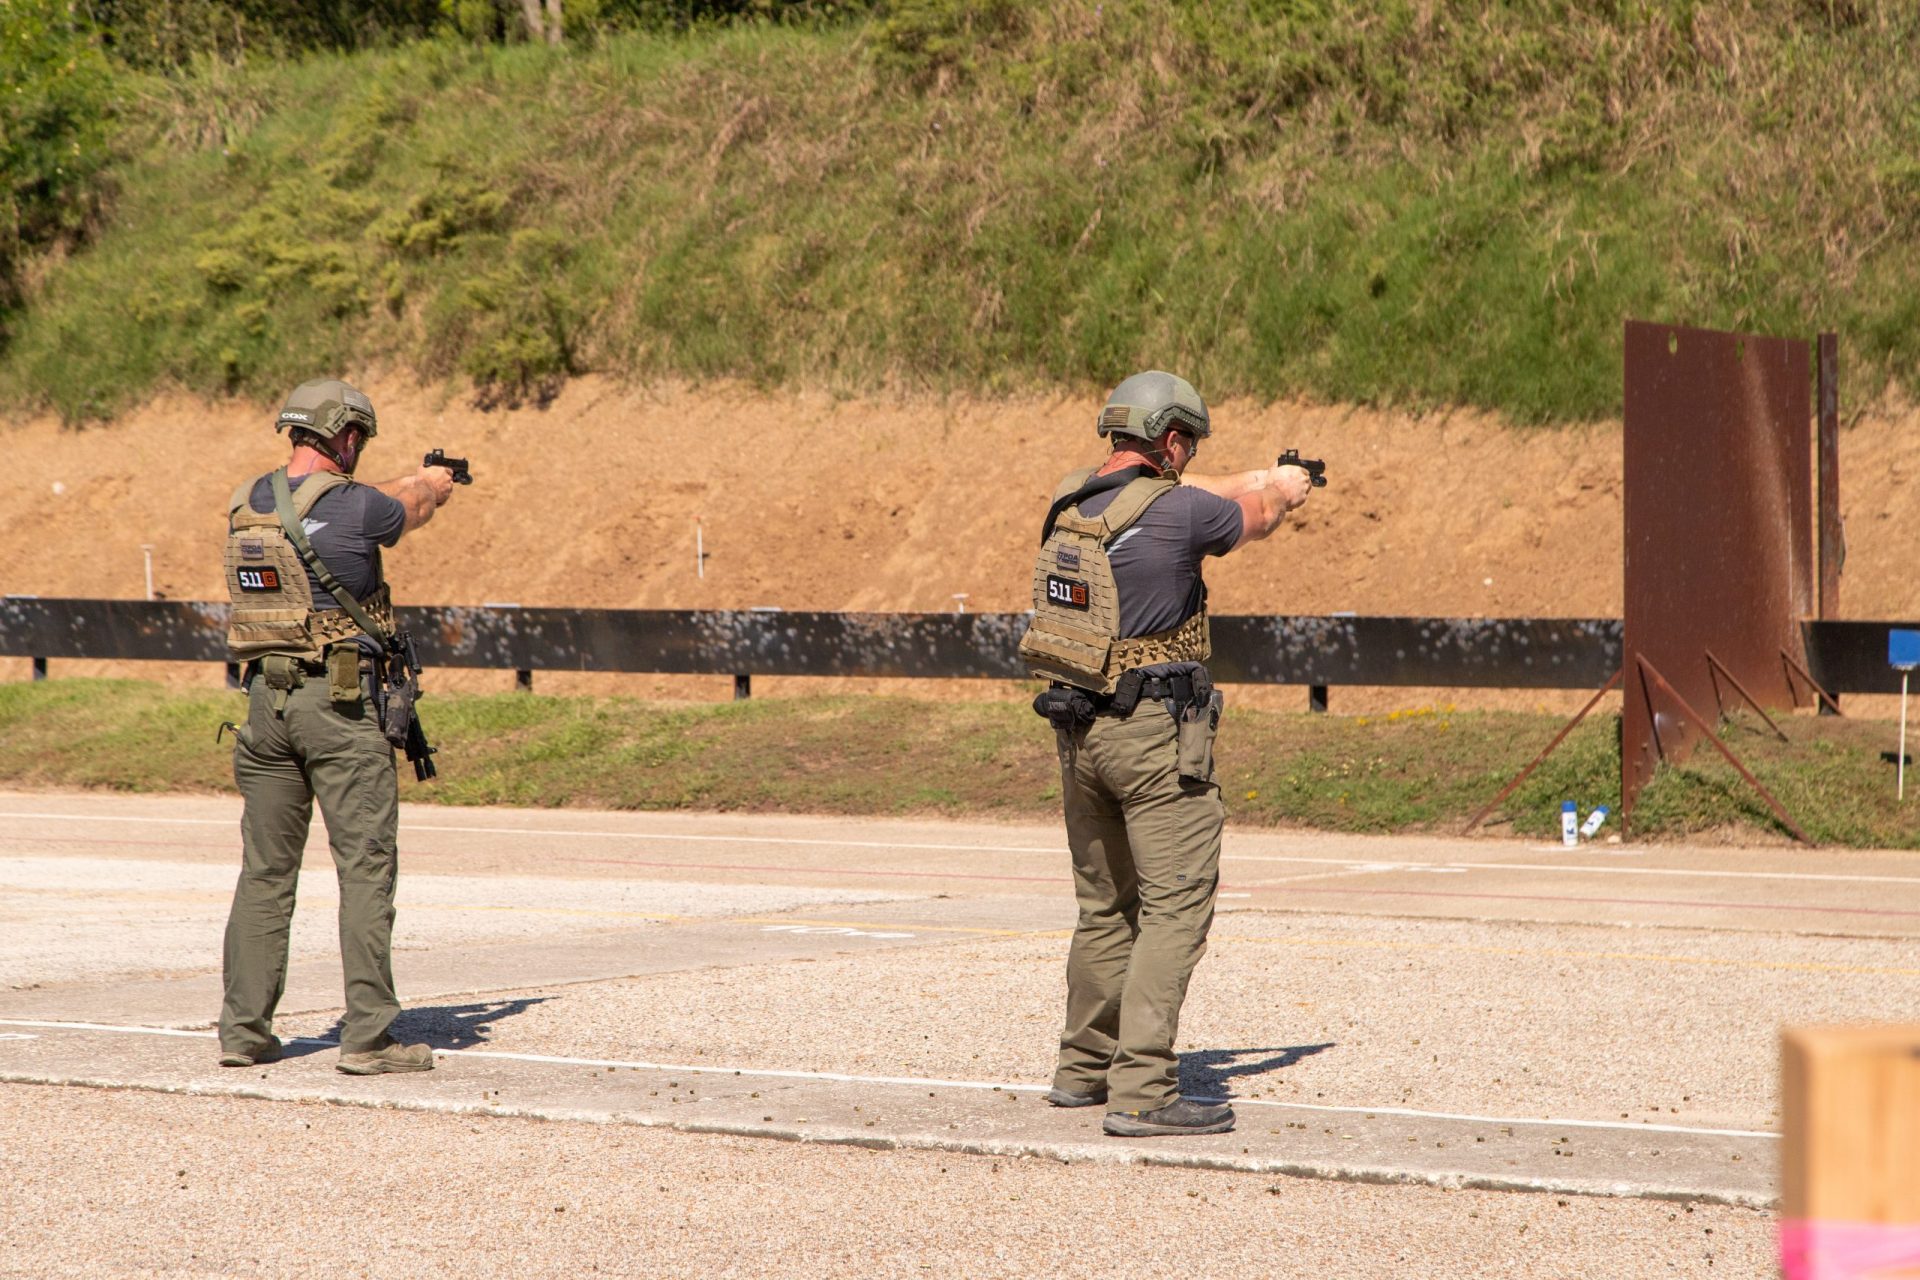 Pistol Shooting Training with police officers